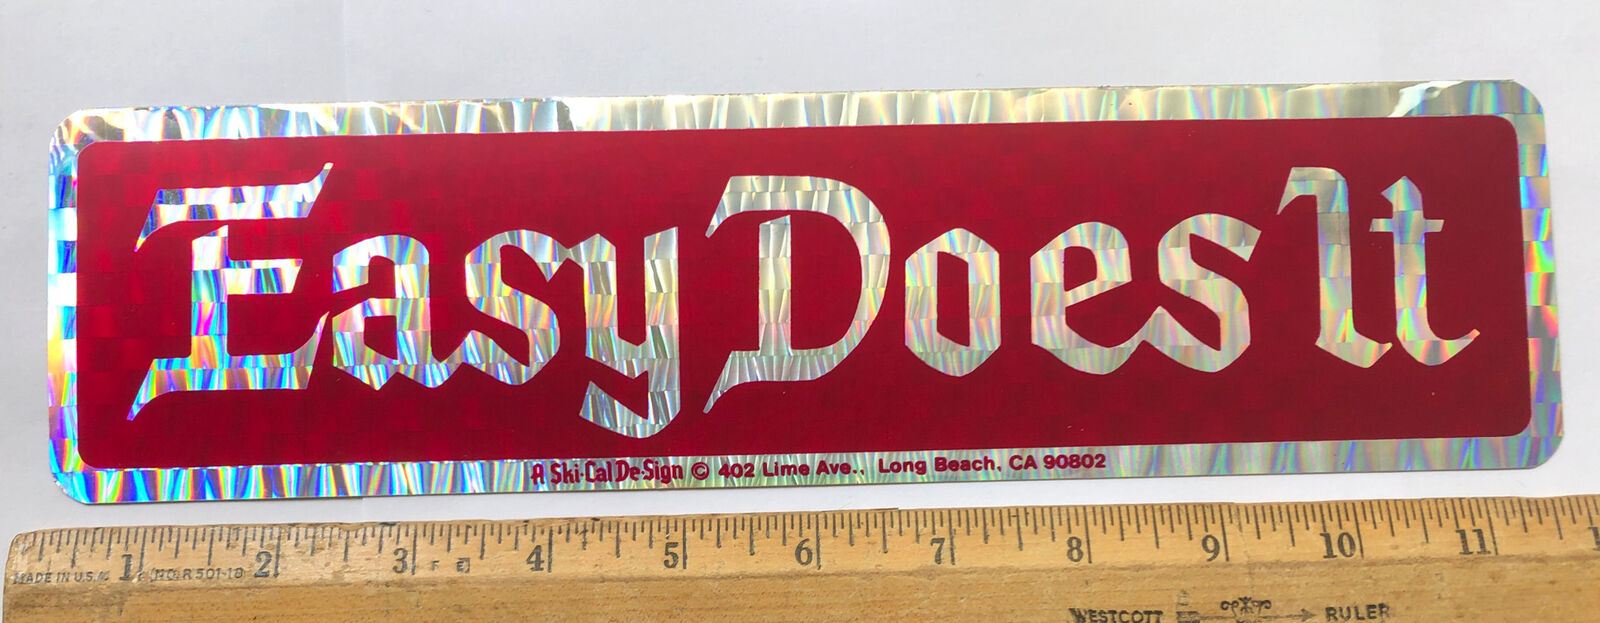 Vintage Easy Does It Prism Decal Bumper Sticker Prismatic Hippie Red 11.5” x 3”